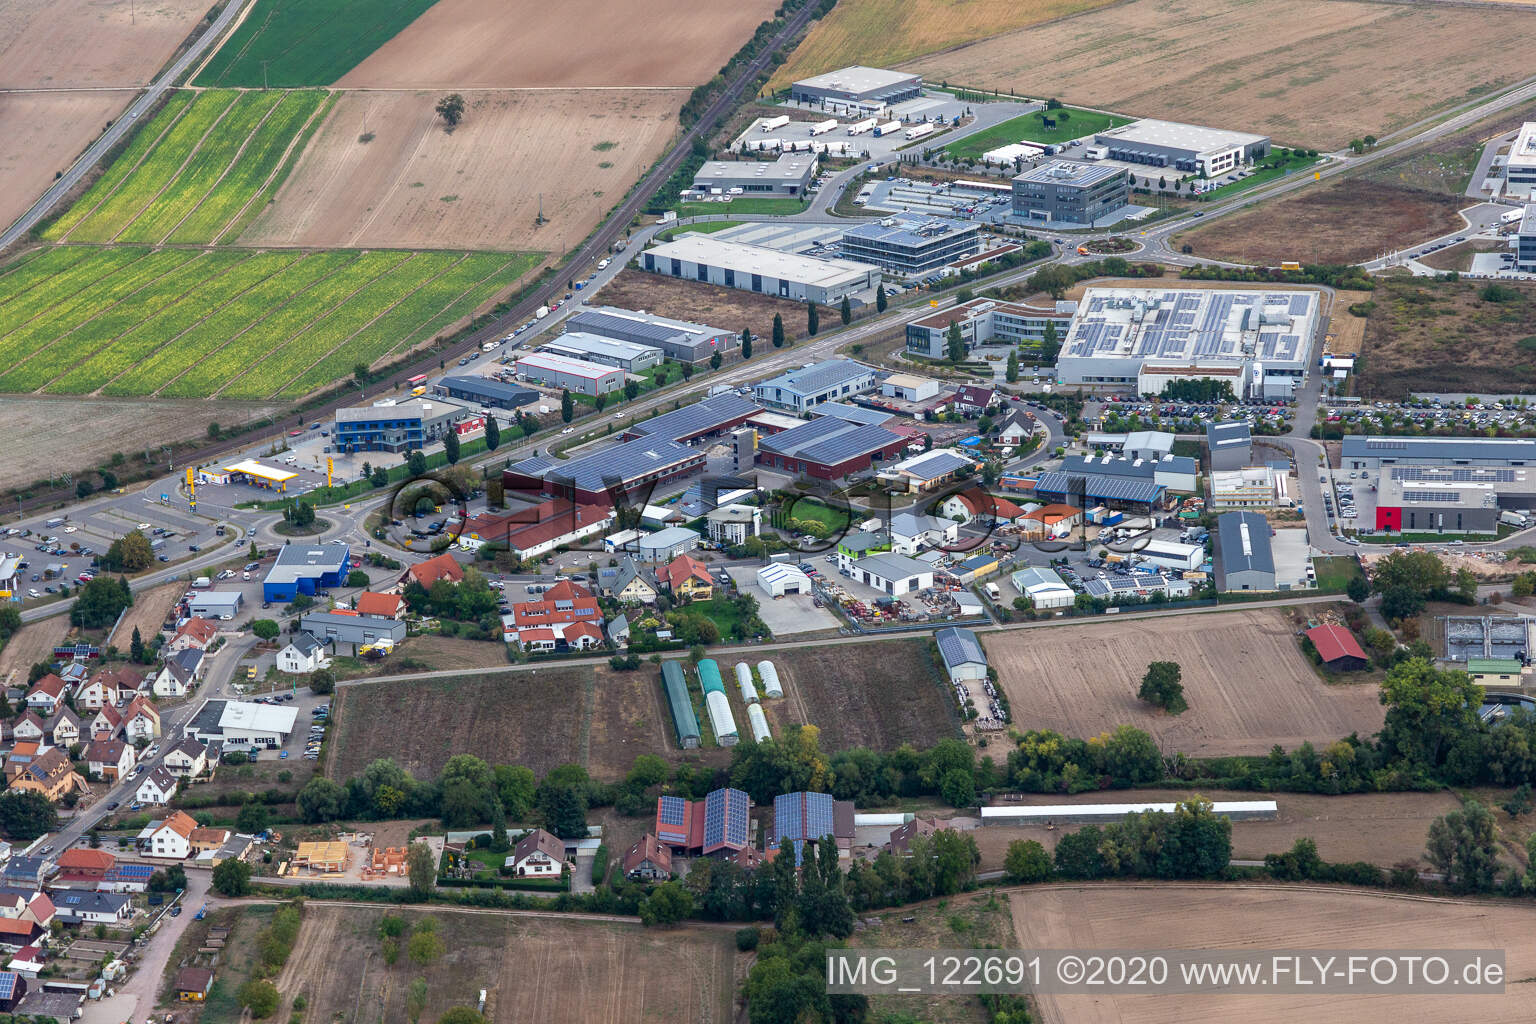 Aerial view of Industrial and commercial area Nord with ITK Engineering GmbH, DBK David + Baader, Transac und Fischer Fahrradmarke in Ruelzheim in the state Rhineland-Palatinate, Germany